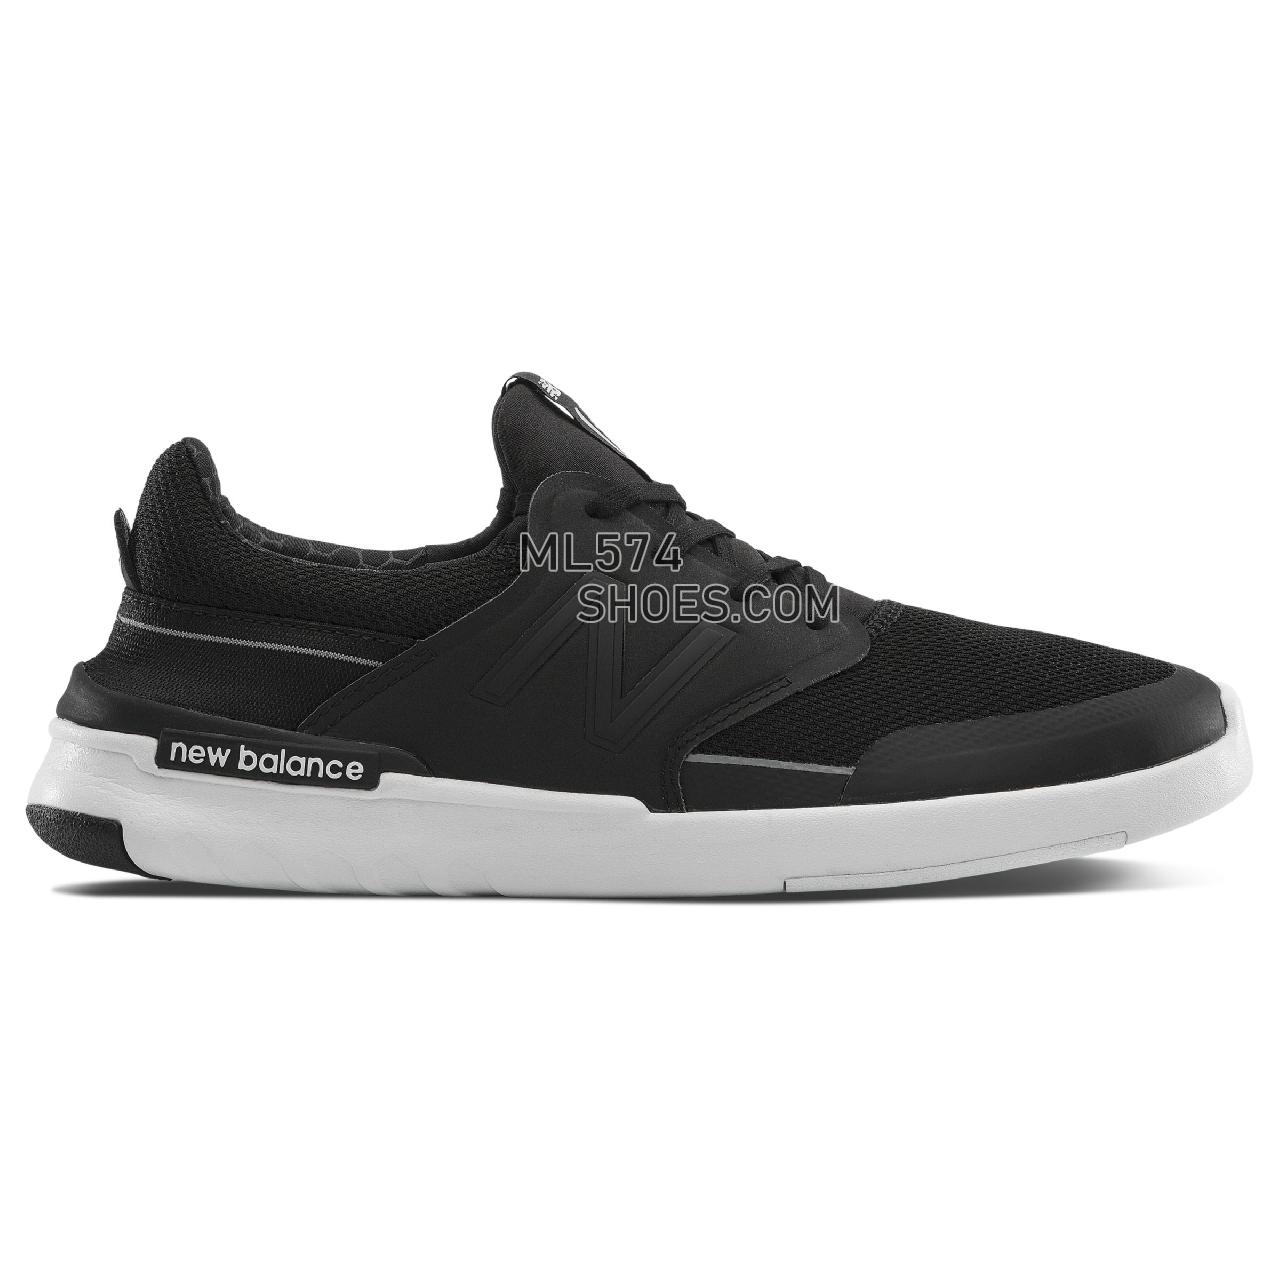 New Balance 659 - Men's 659 - Classic Black with White - AM659BKW